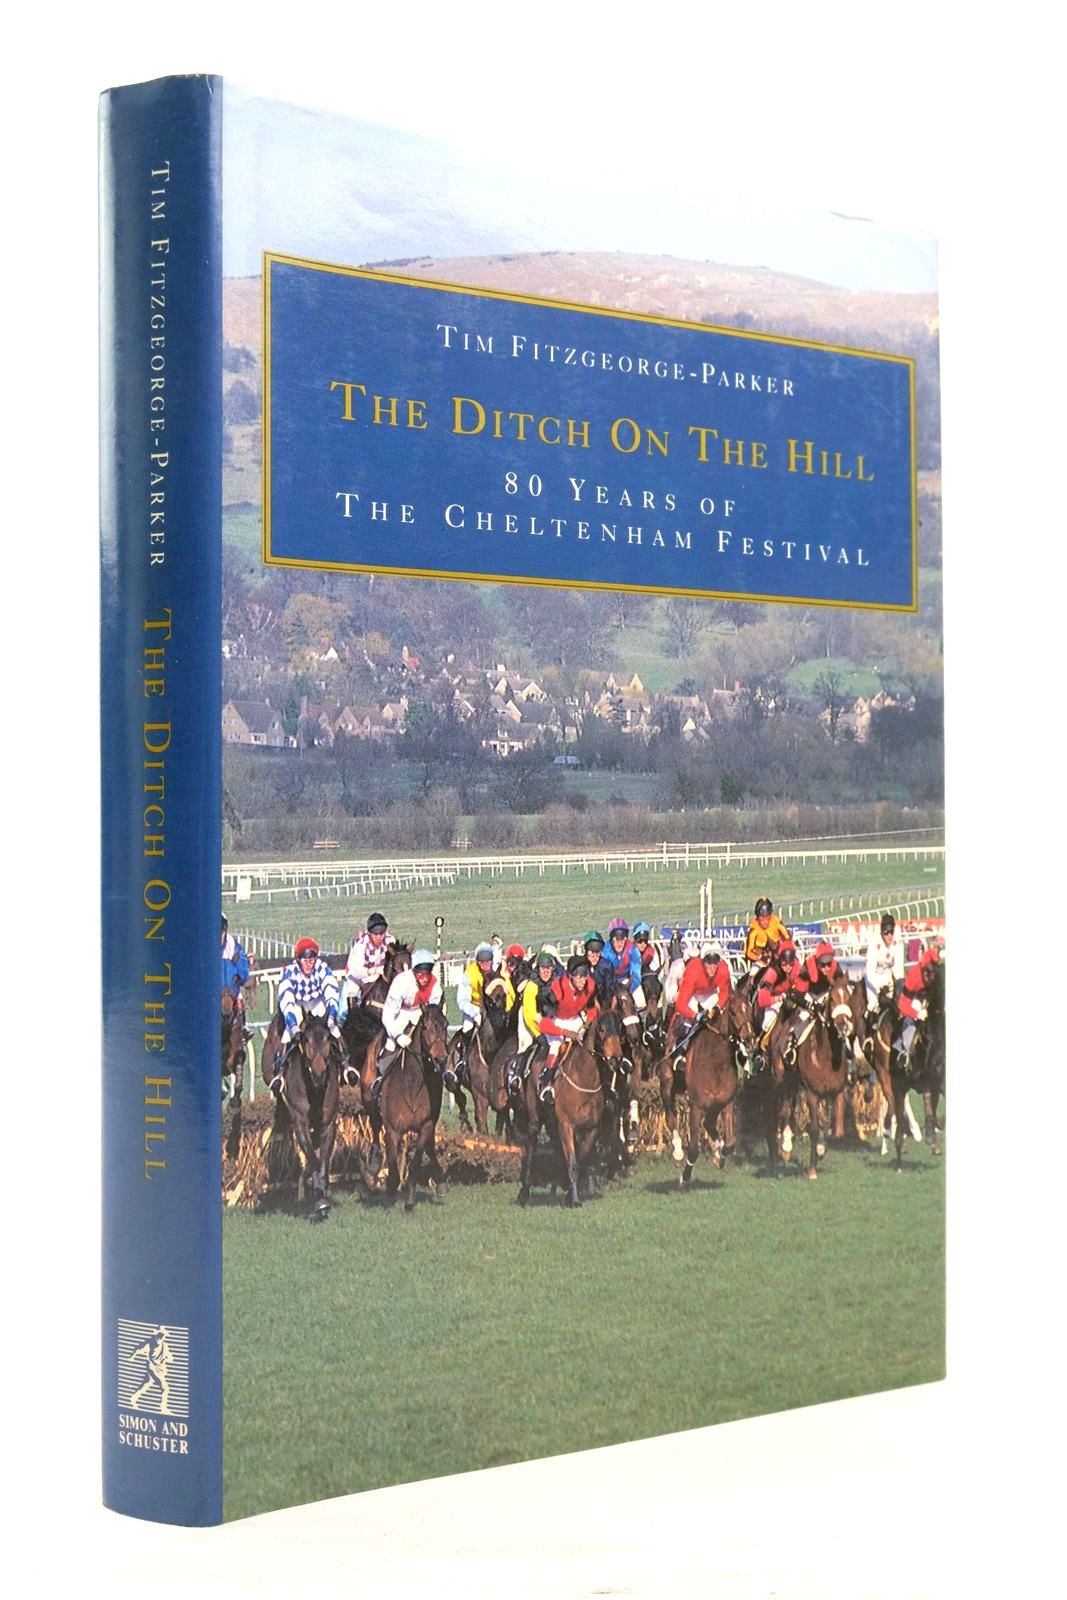 Photo of THE DITCH ON THE HILL: 80 YEARS OF THE CHELTENHAM FESTIVAL written by Fitzgeorge-Parker, Tim published by Simon & Schuster Ltd. (STOCK CODE: 2137960)  for sale by Stella & Rose's Books